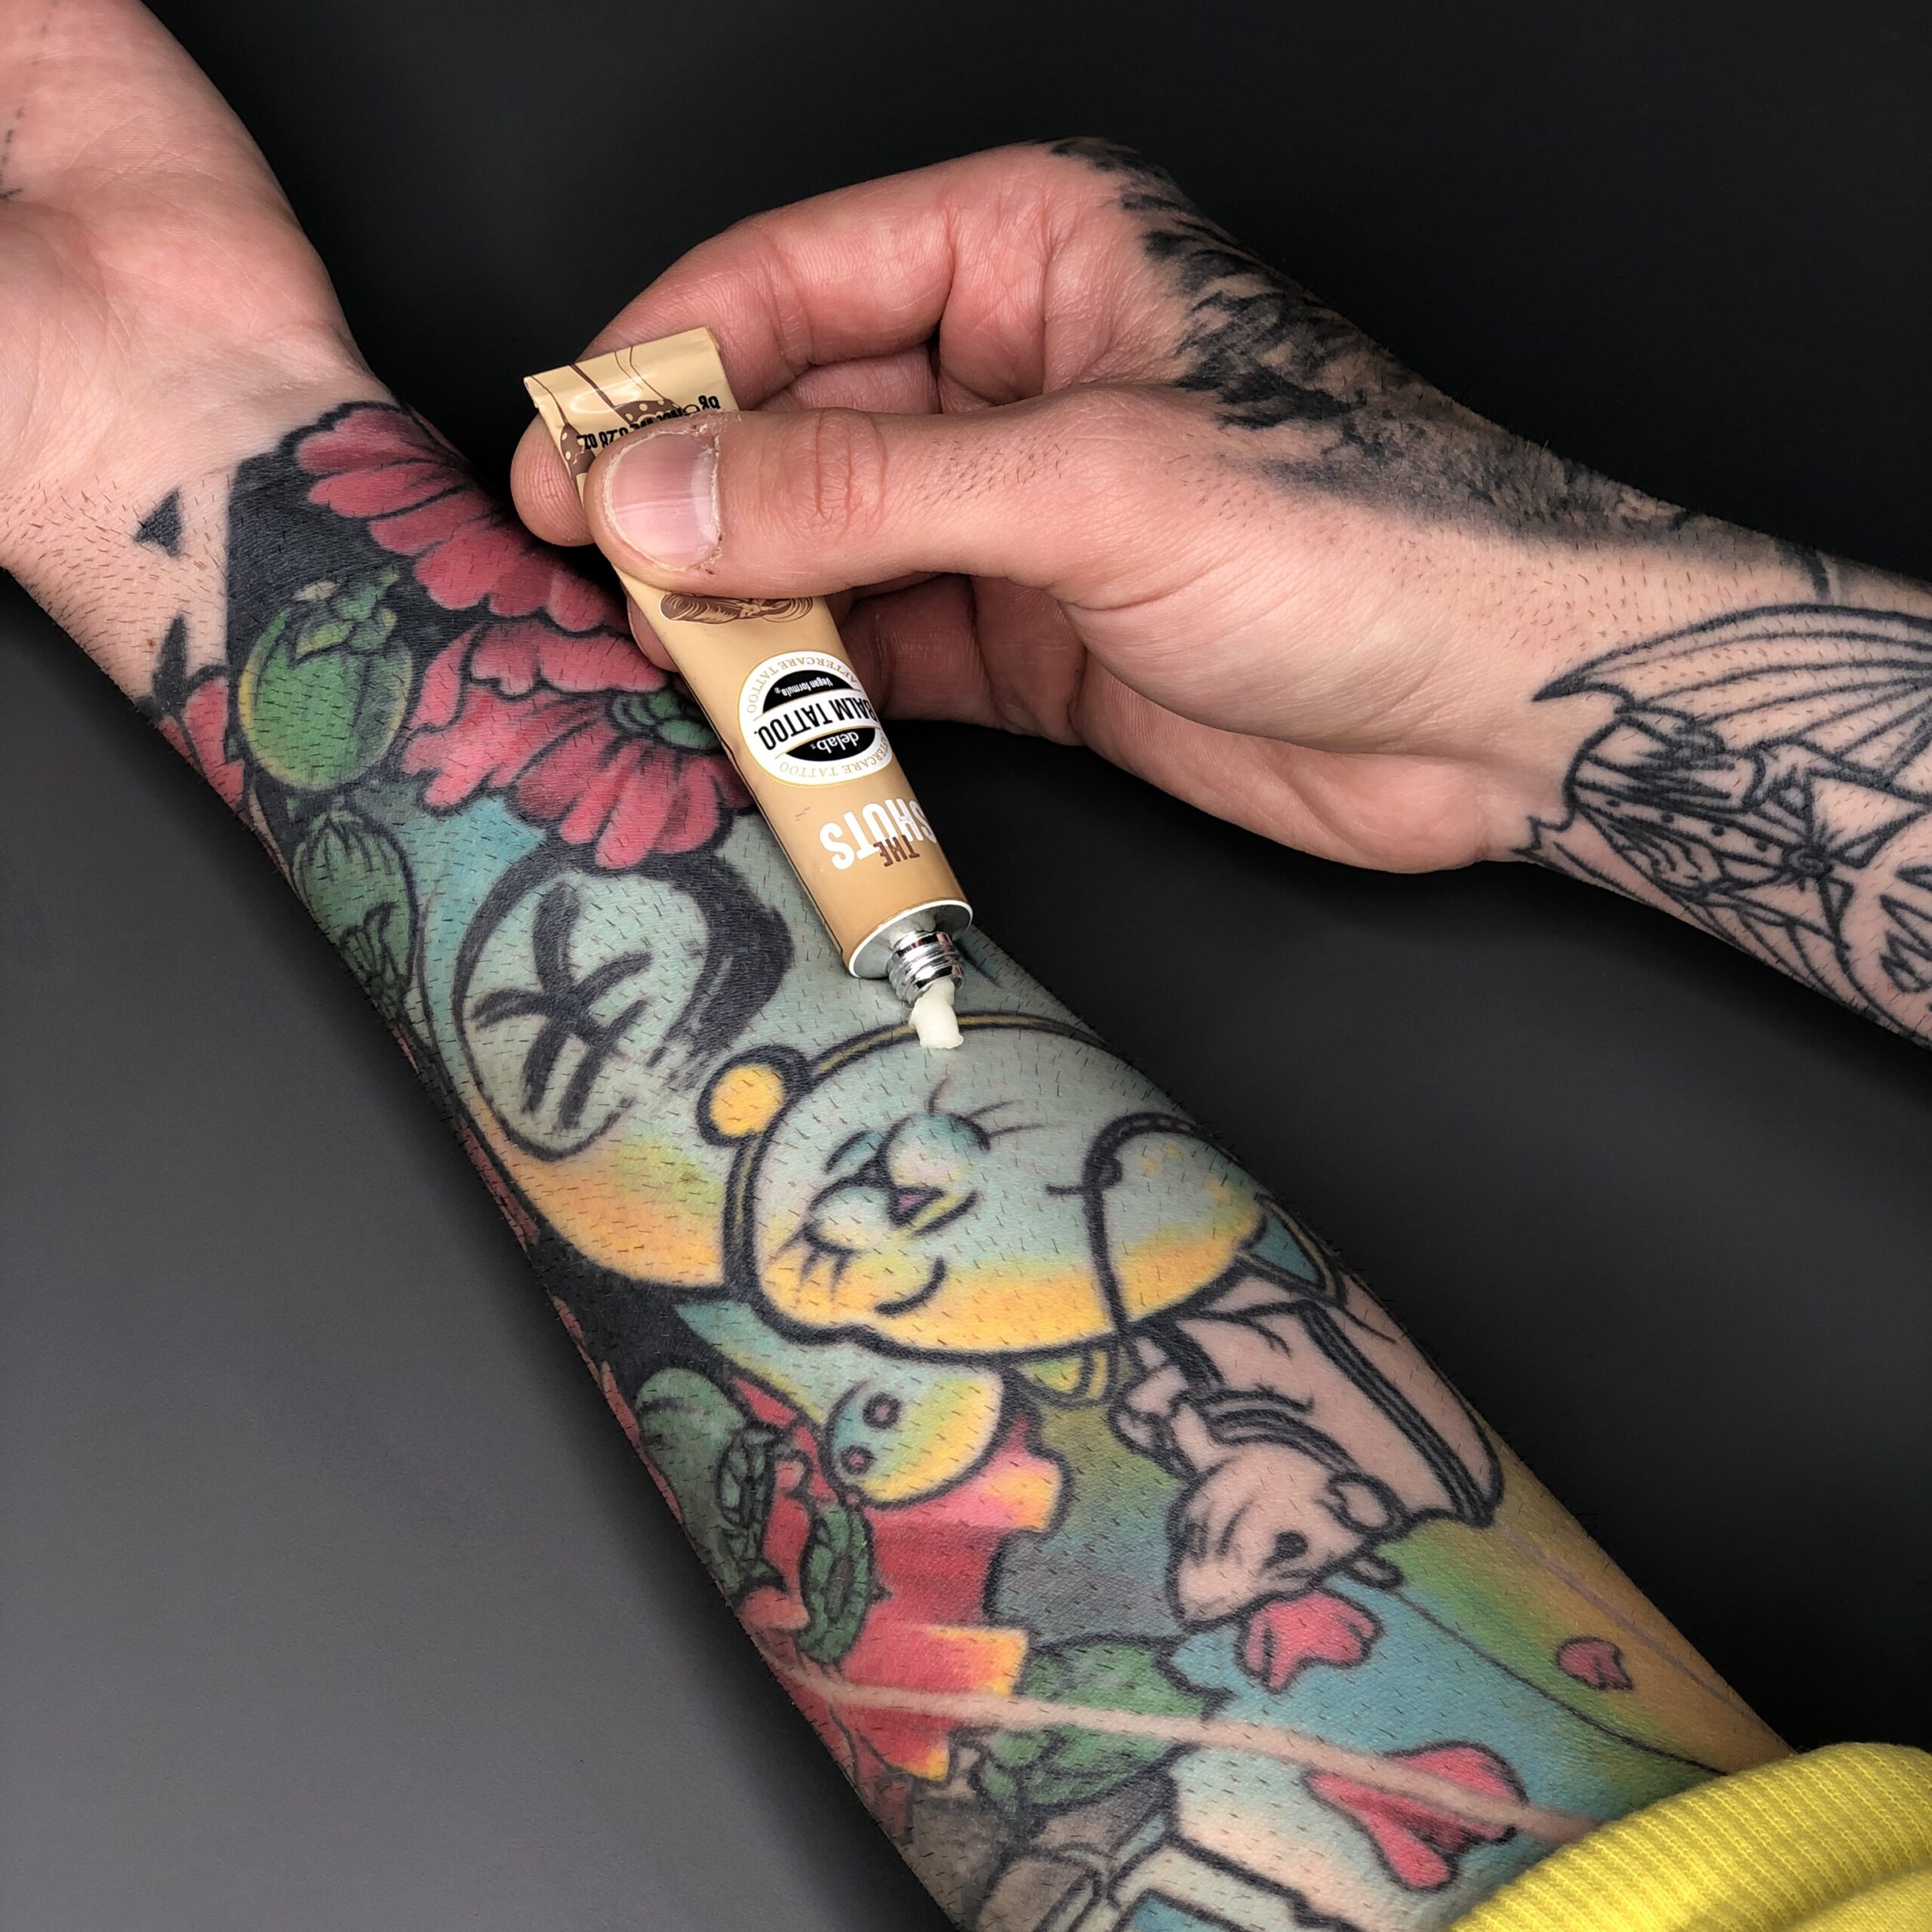 What you need to know about tattoo healing